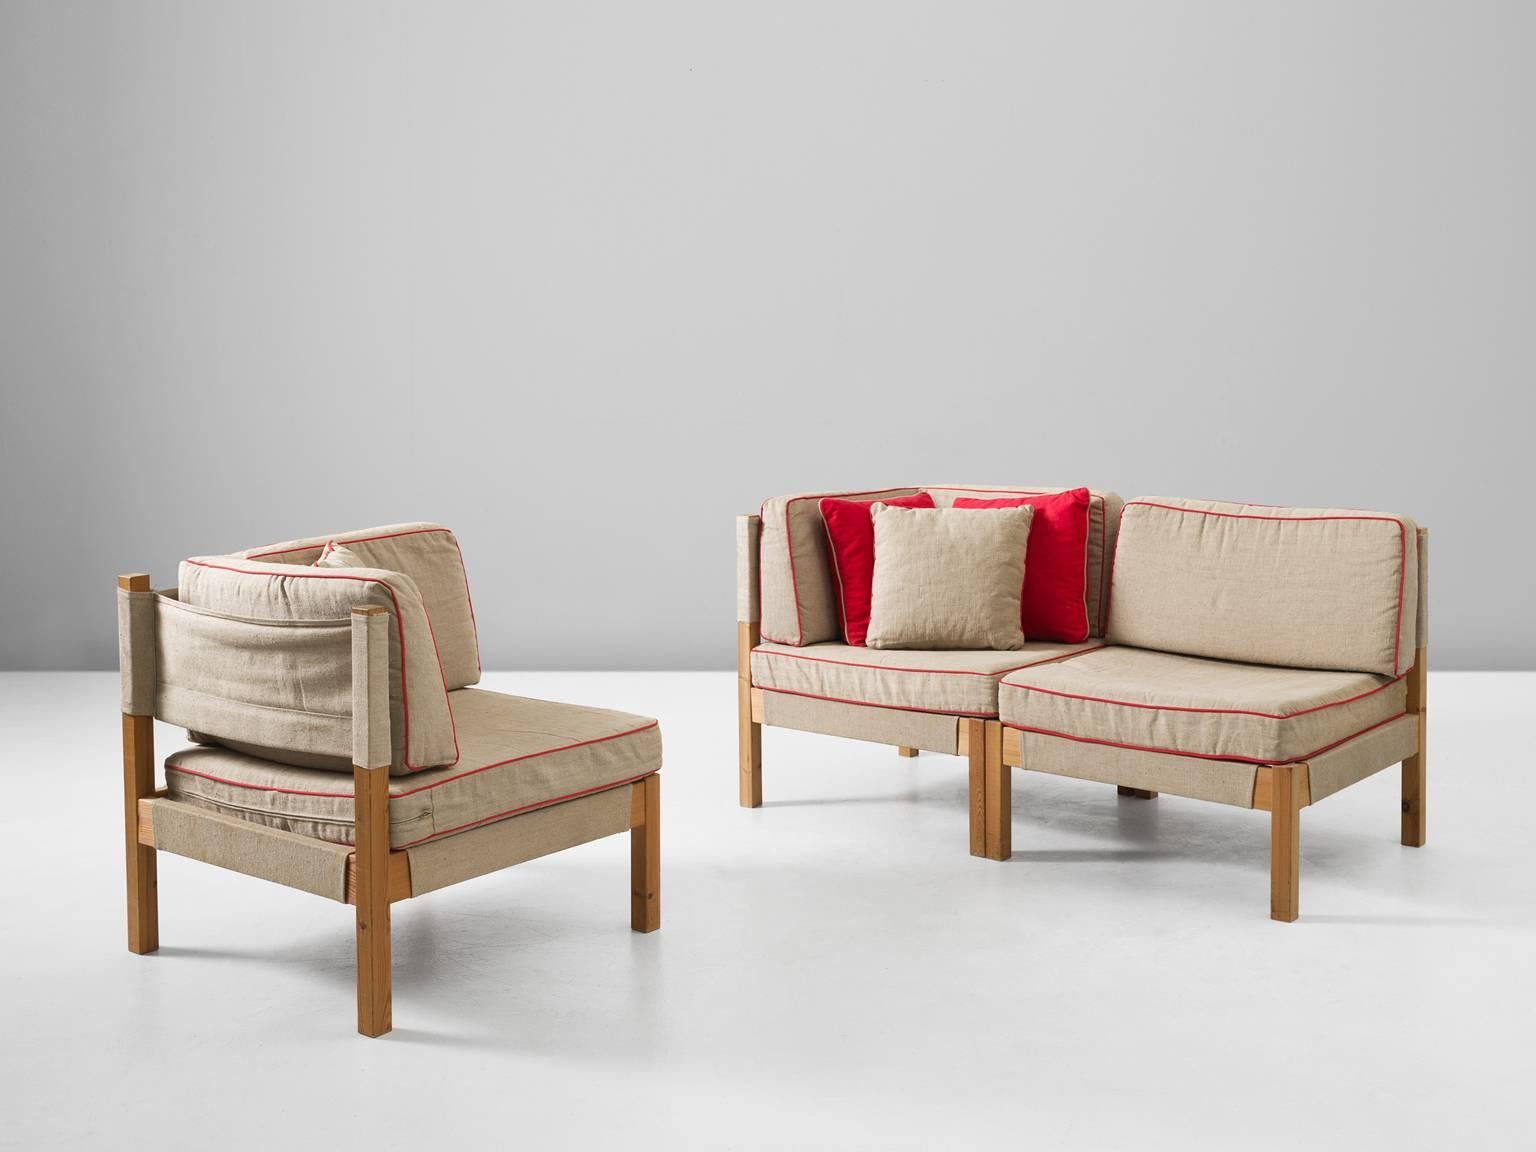 Mid-Century Modern Danish Modular Sofa in Natural Canvas and Red Accents